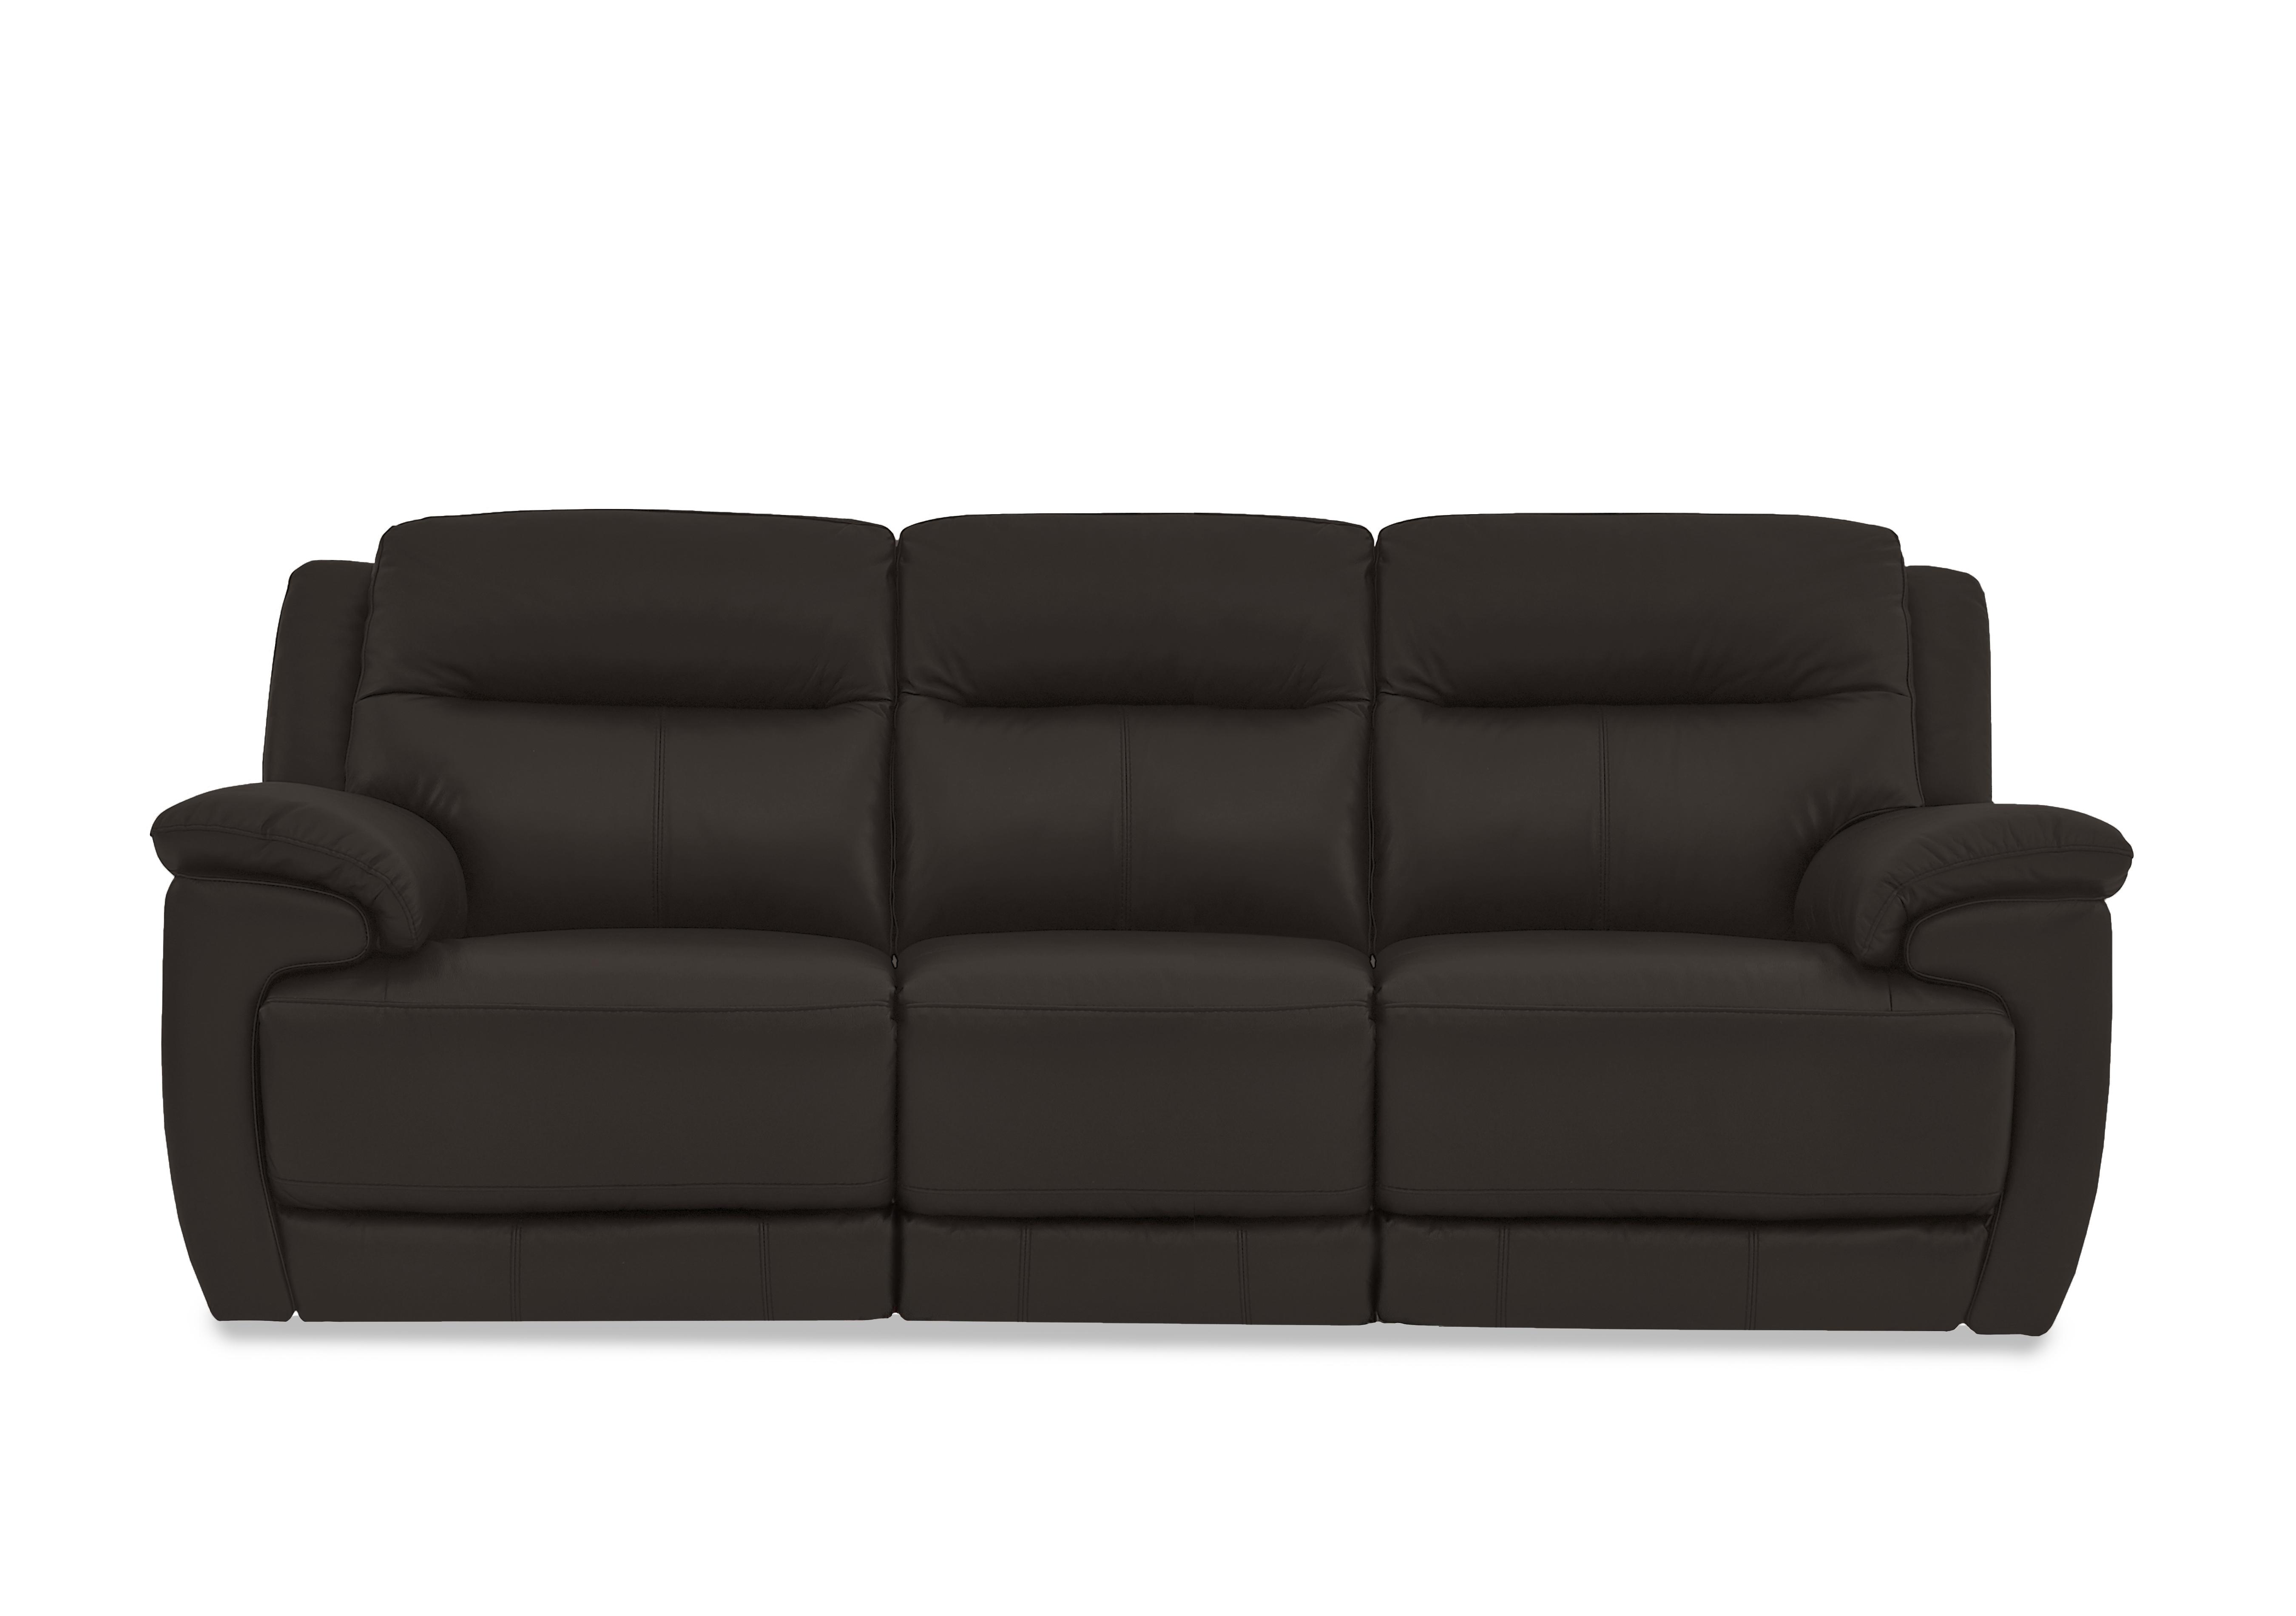 Touch 3 Seater Leather Sofa in Bv-1748 Dark Chocolate on Furniture Village